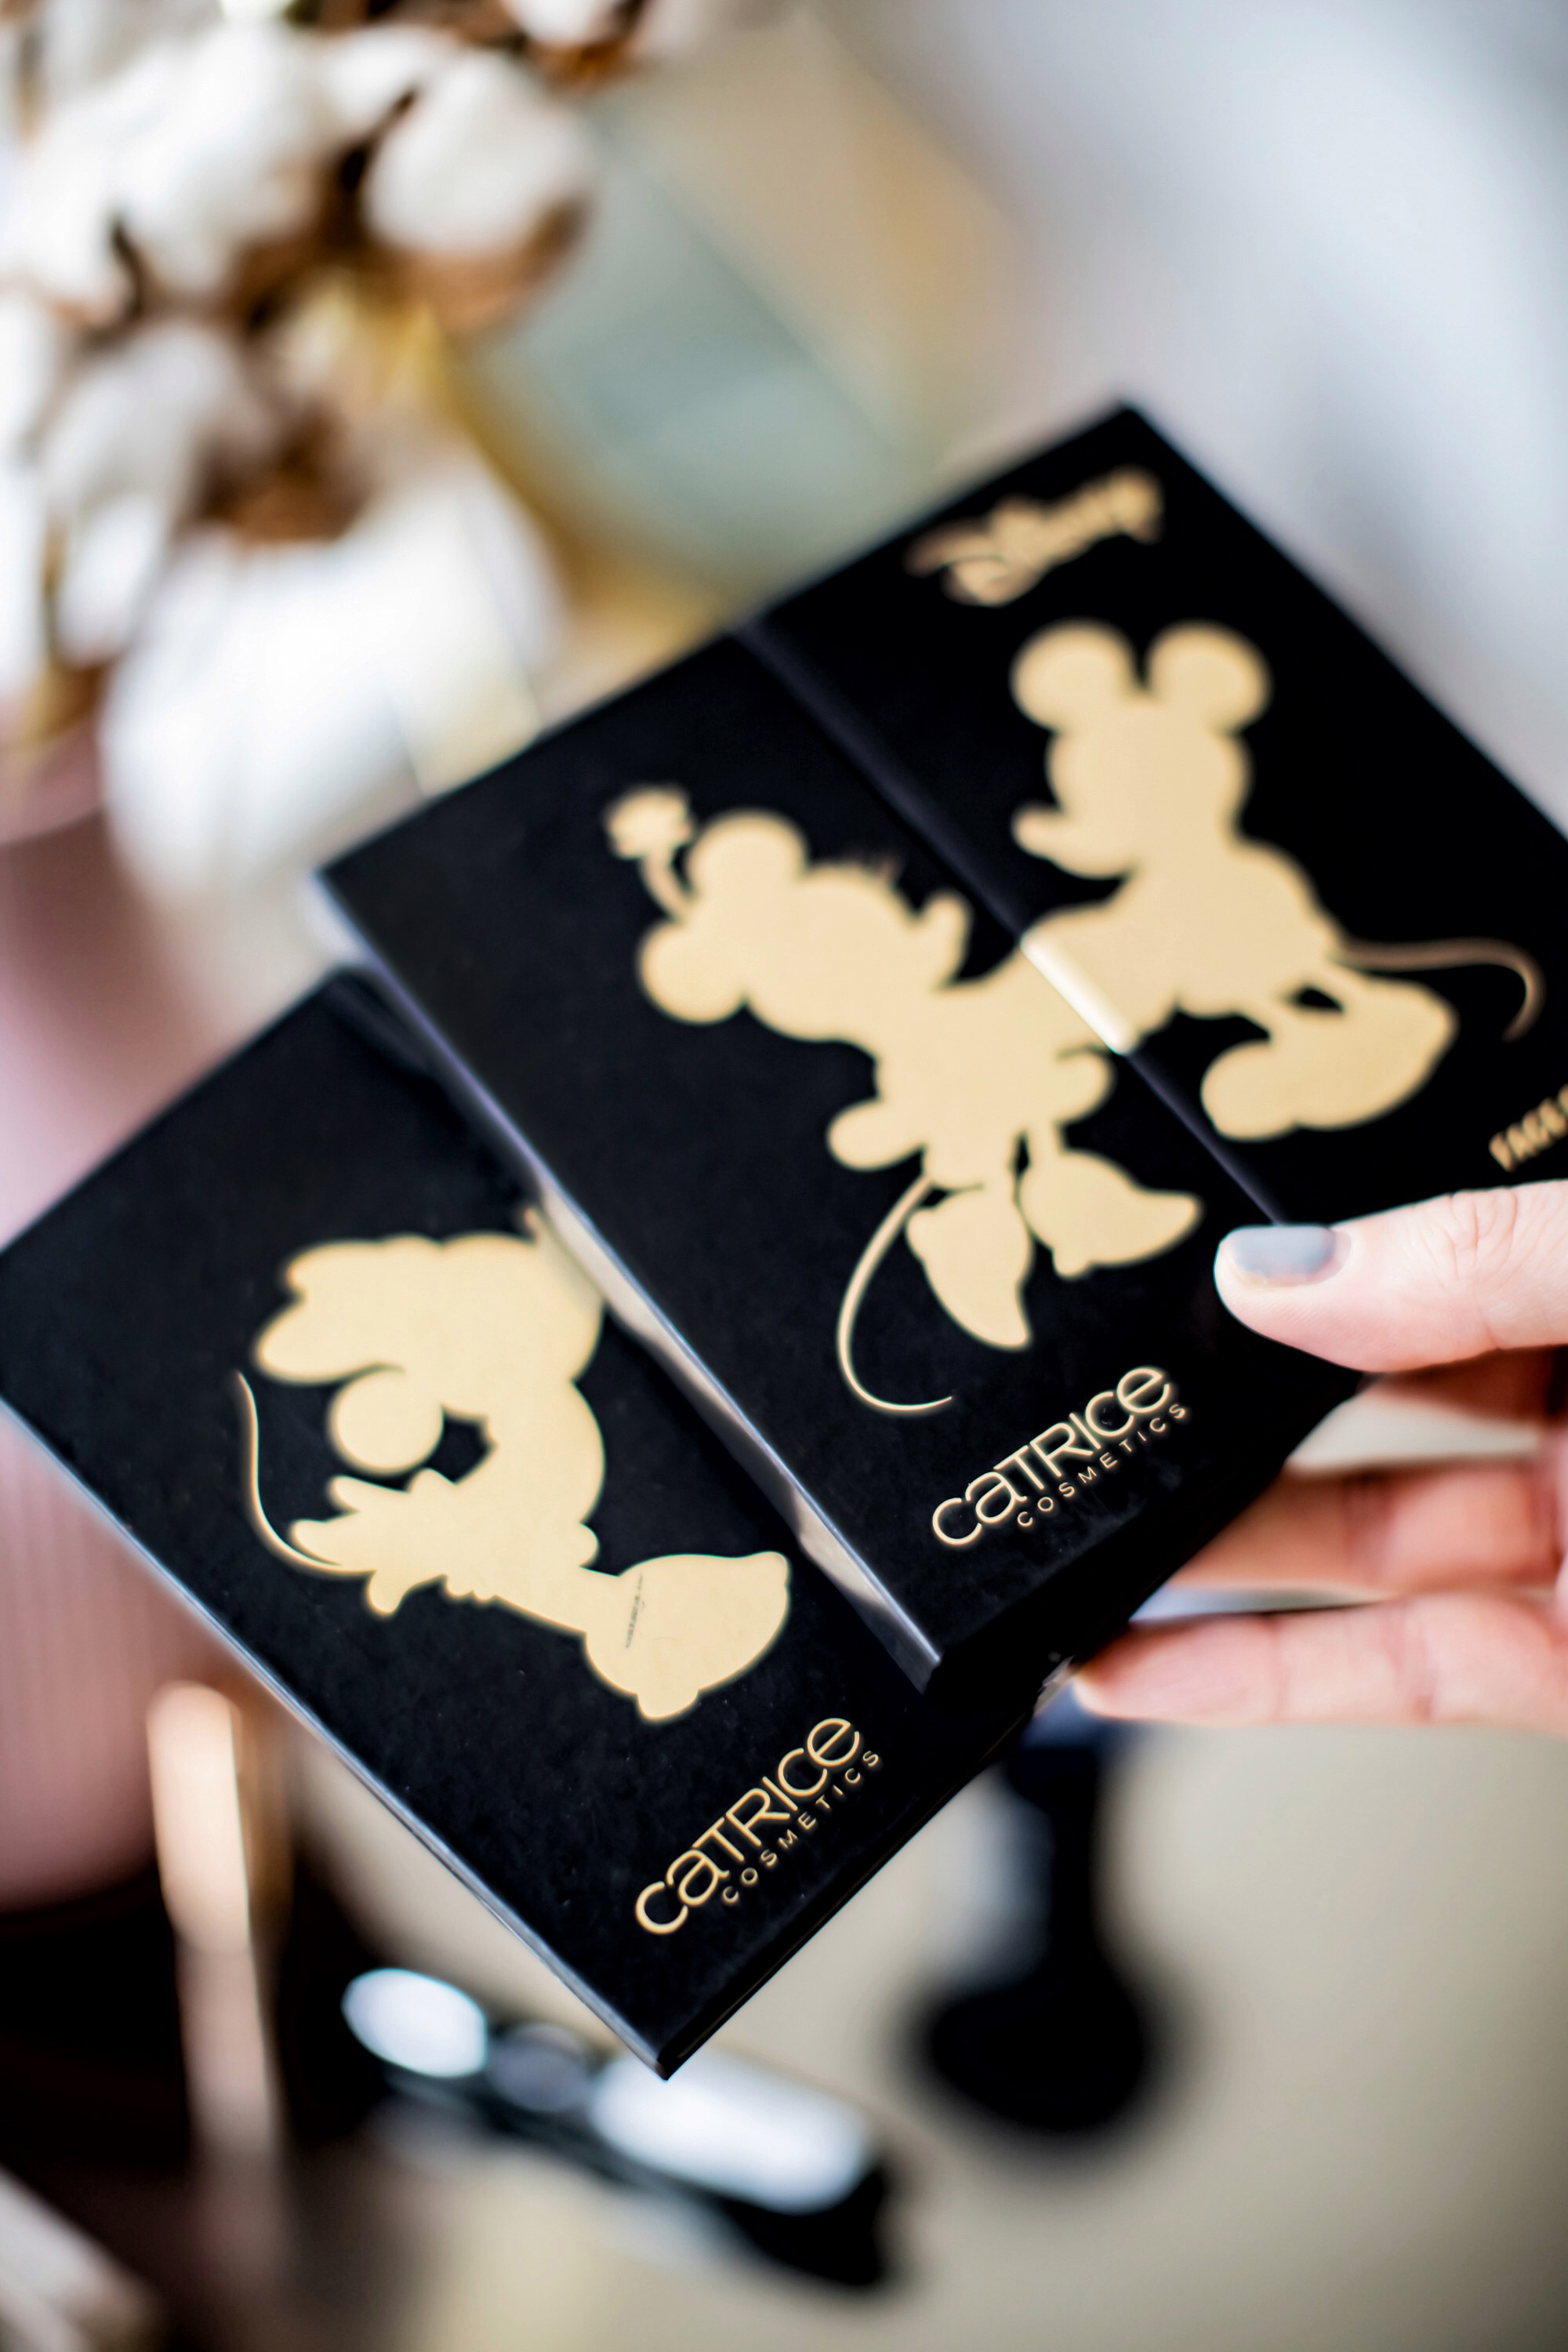 All eyes on : Die Catrice Mickey’s 90th Anniversary Limited Edition